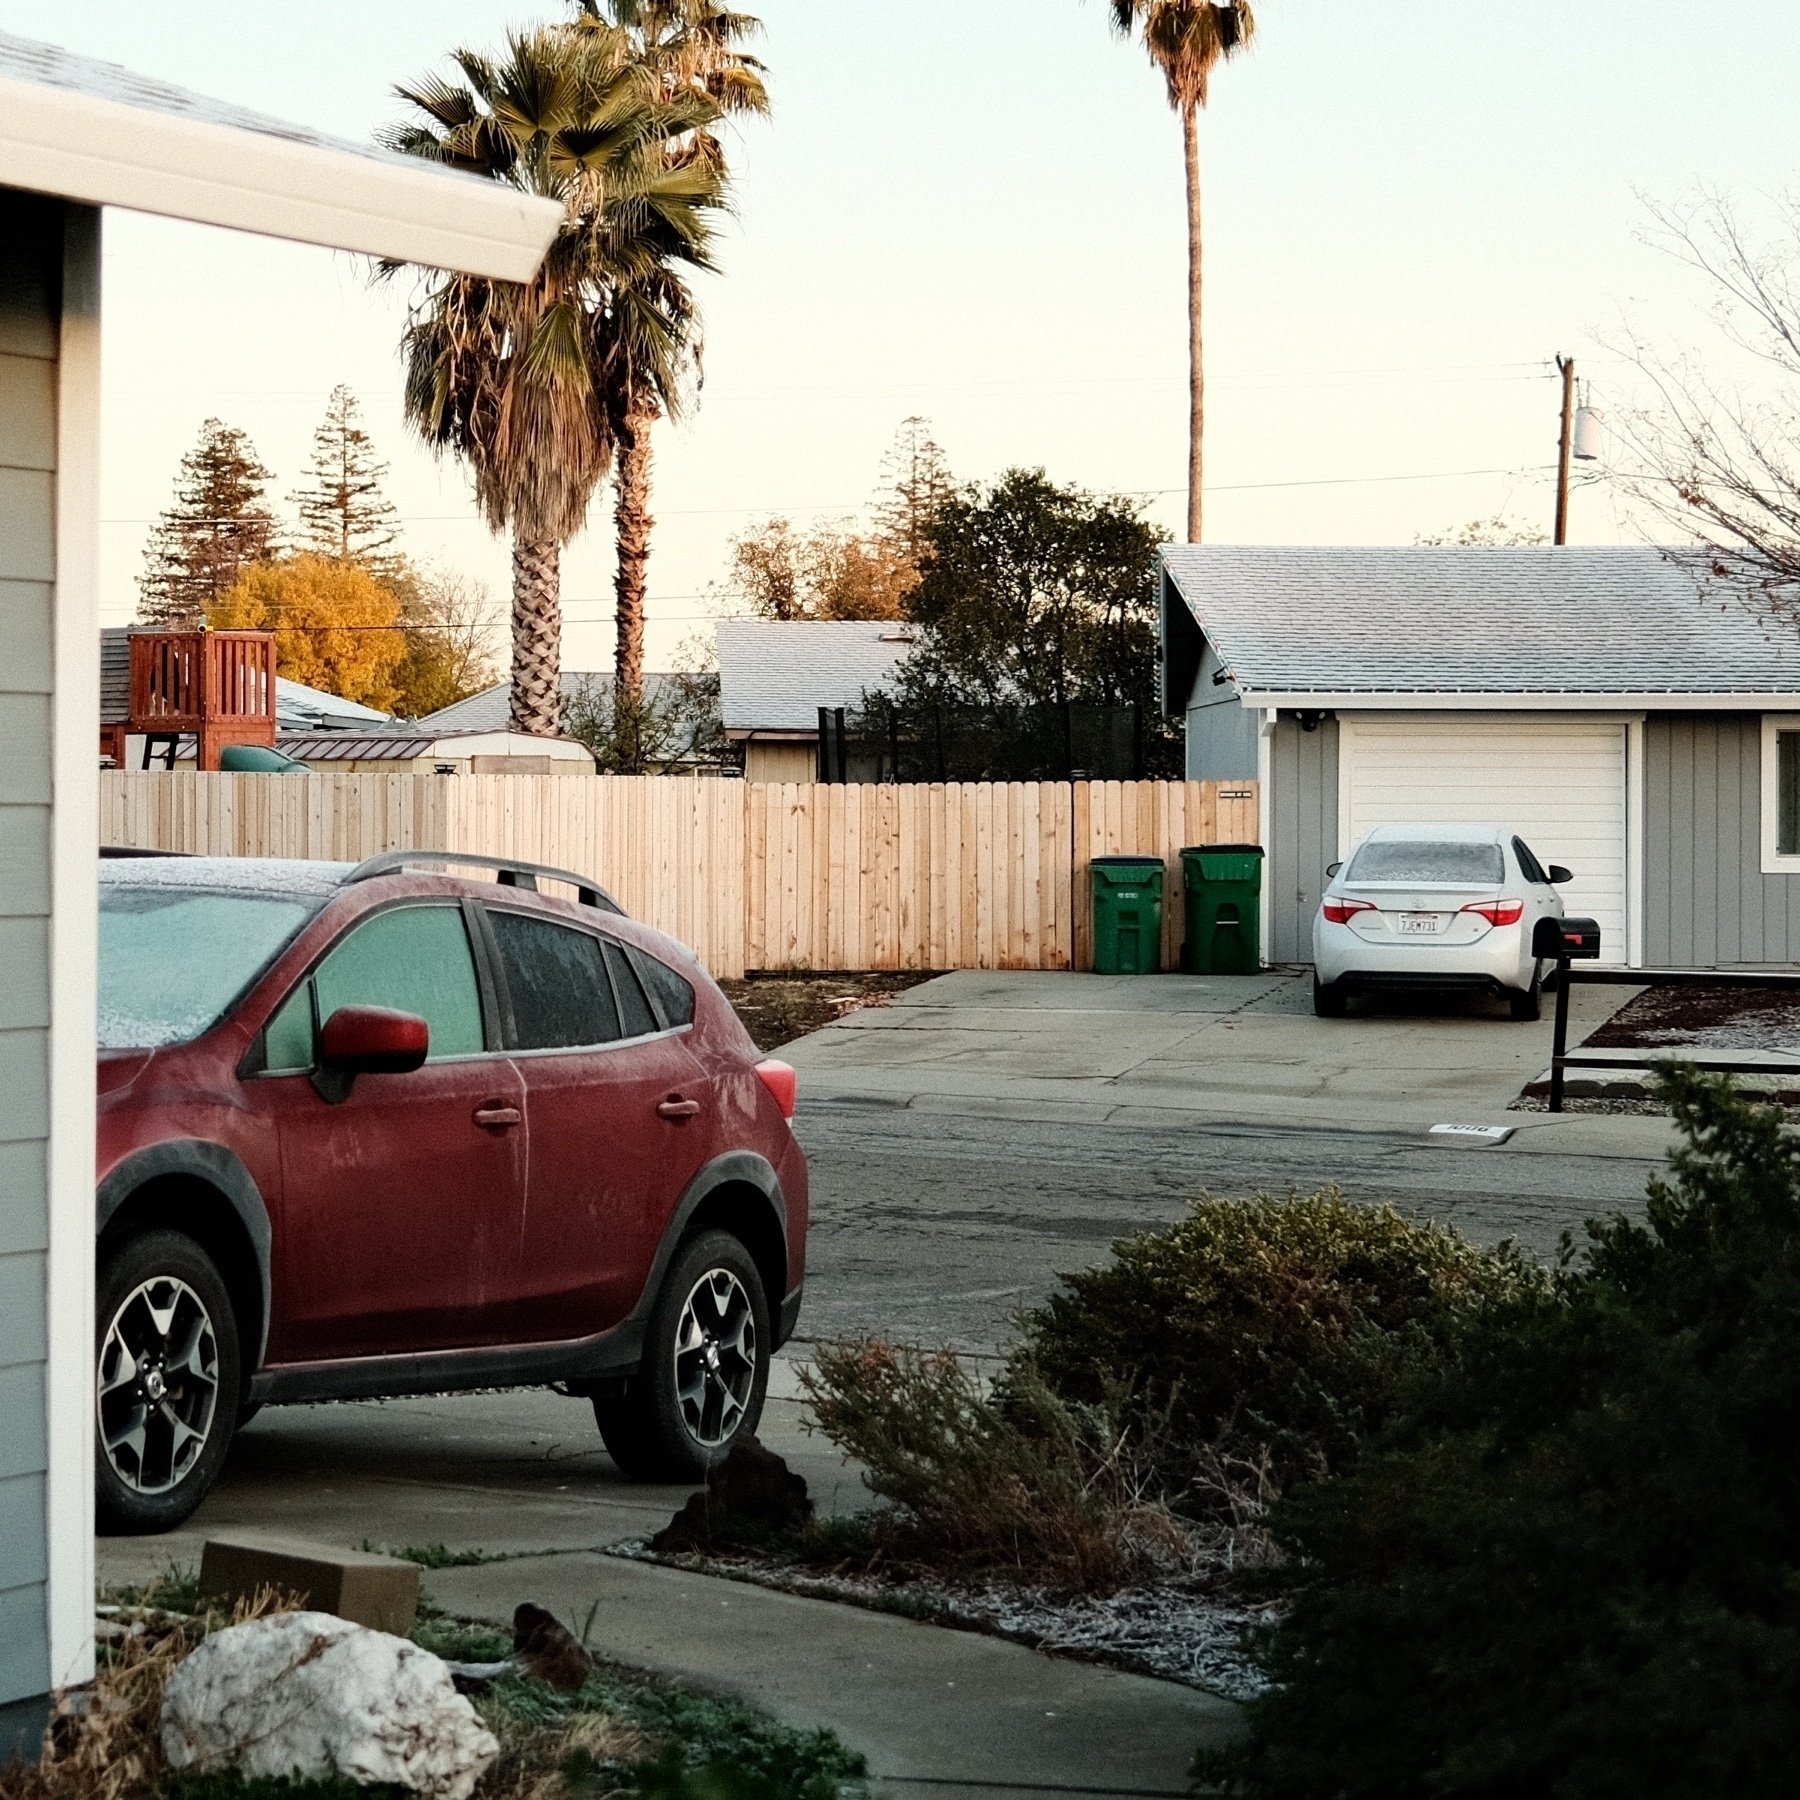 within a residential area, frost on a roof, car, and the ground with palm trees in the distance